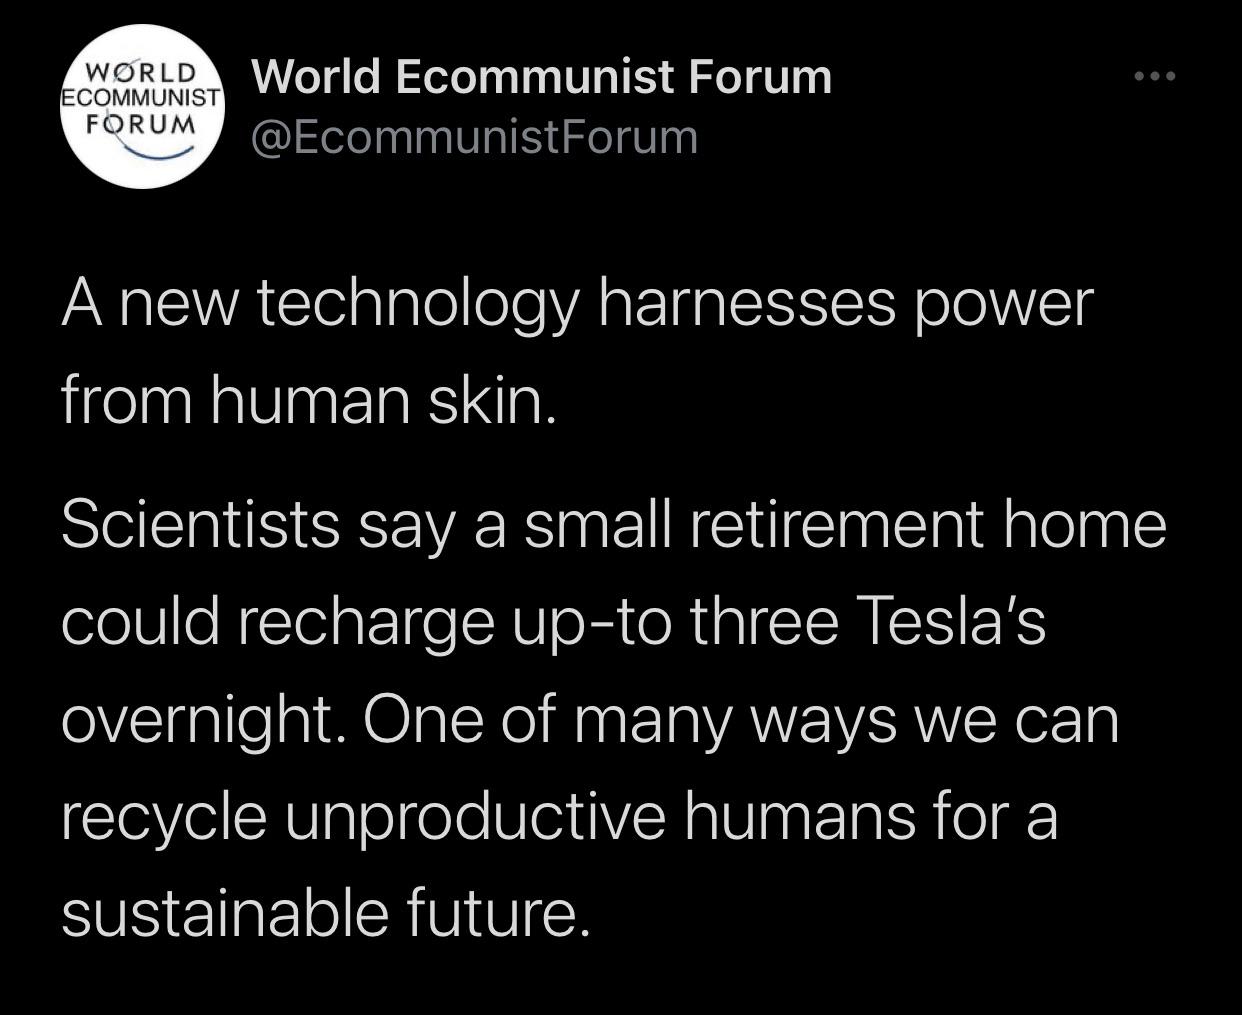 One of many ways we can recycle unproductive humans for a sustainable future.